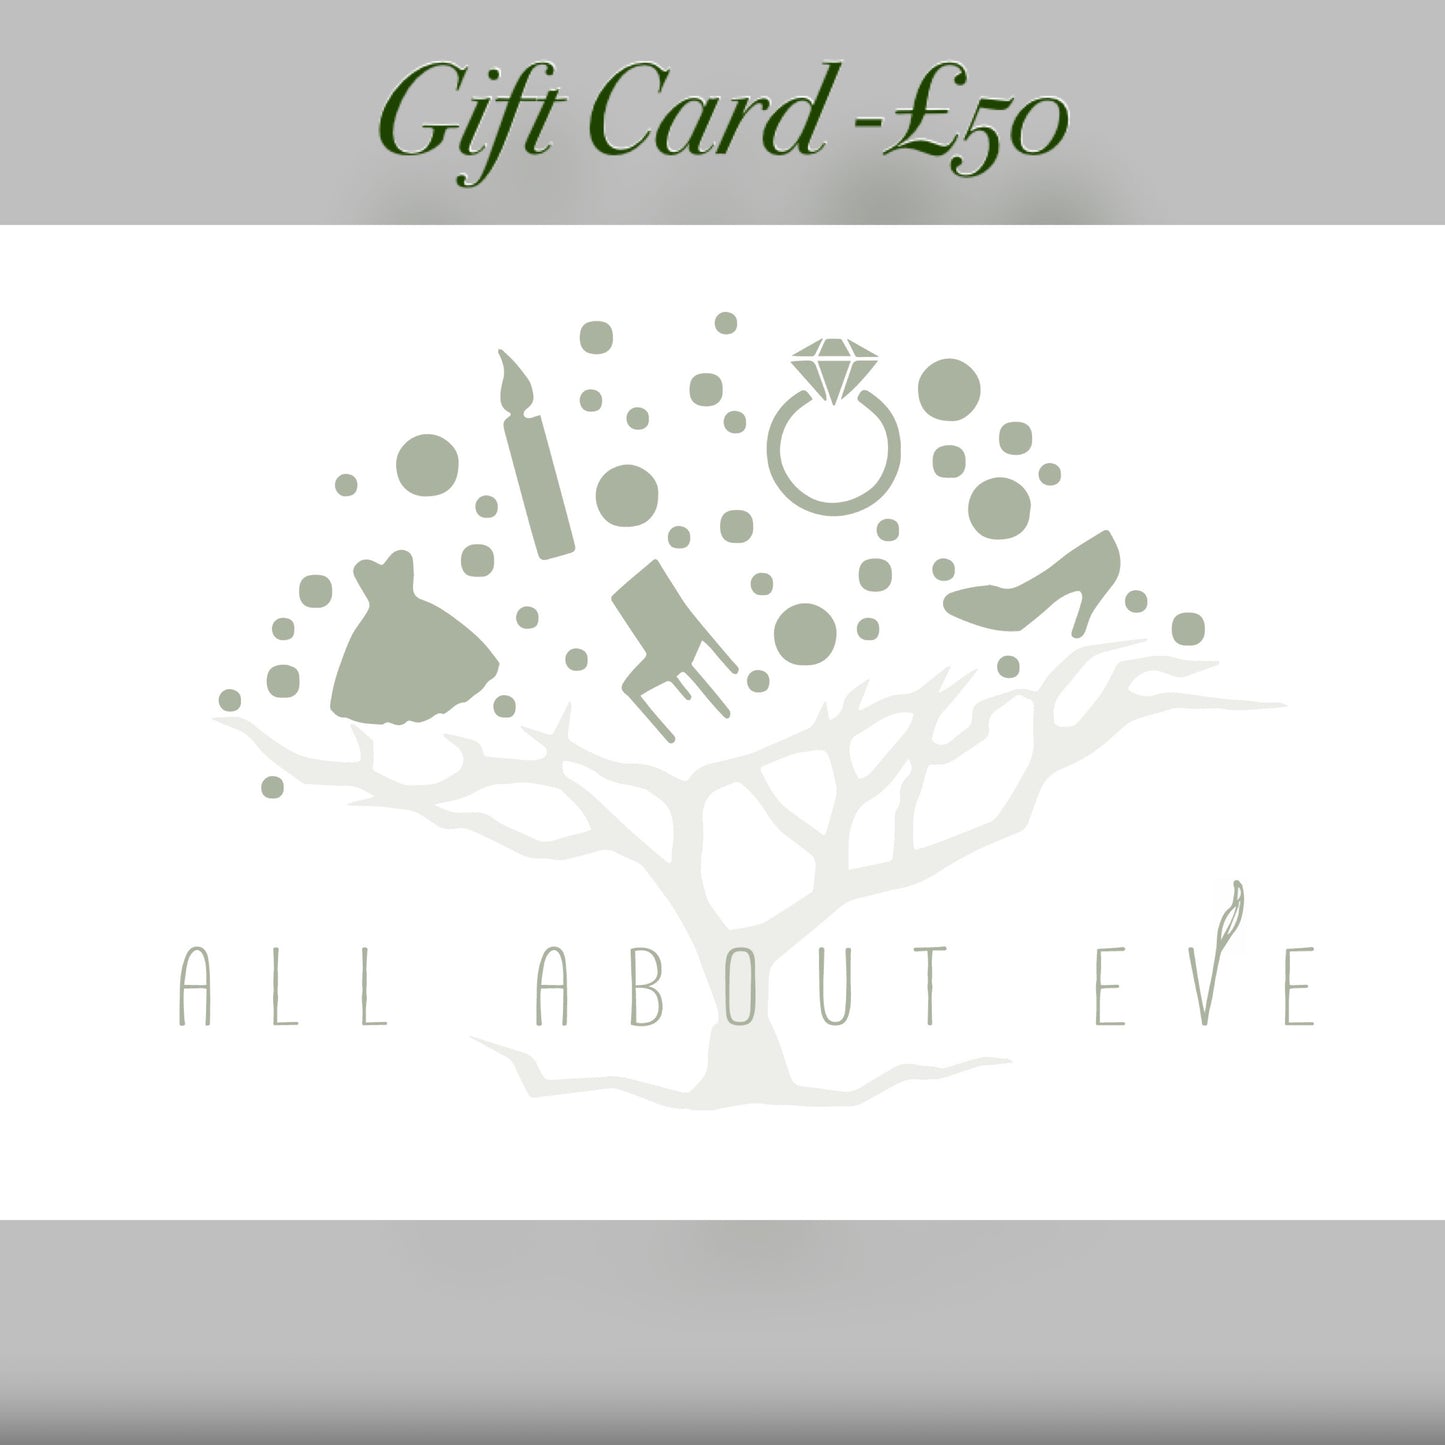 £50 Online Gift card